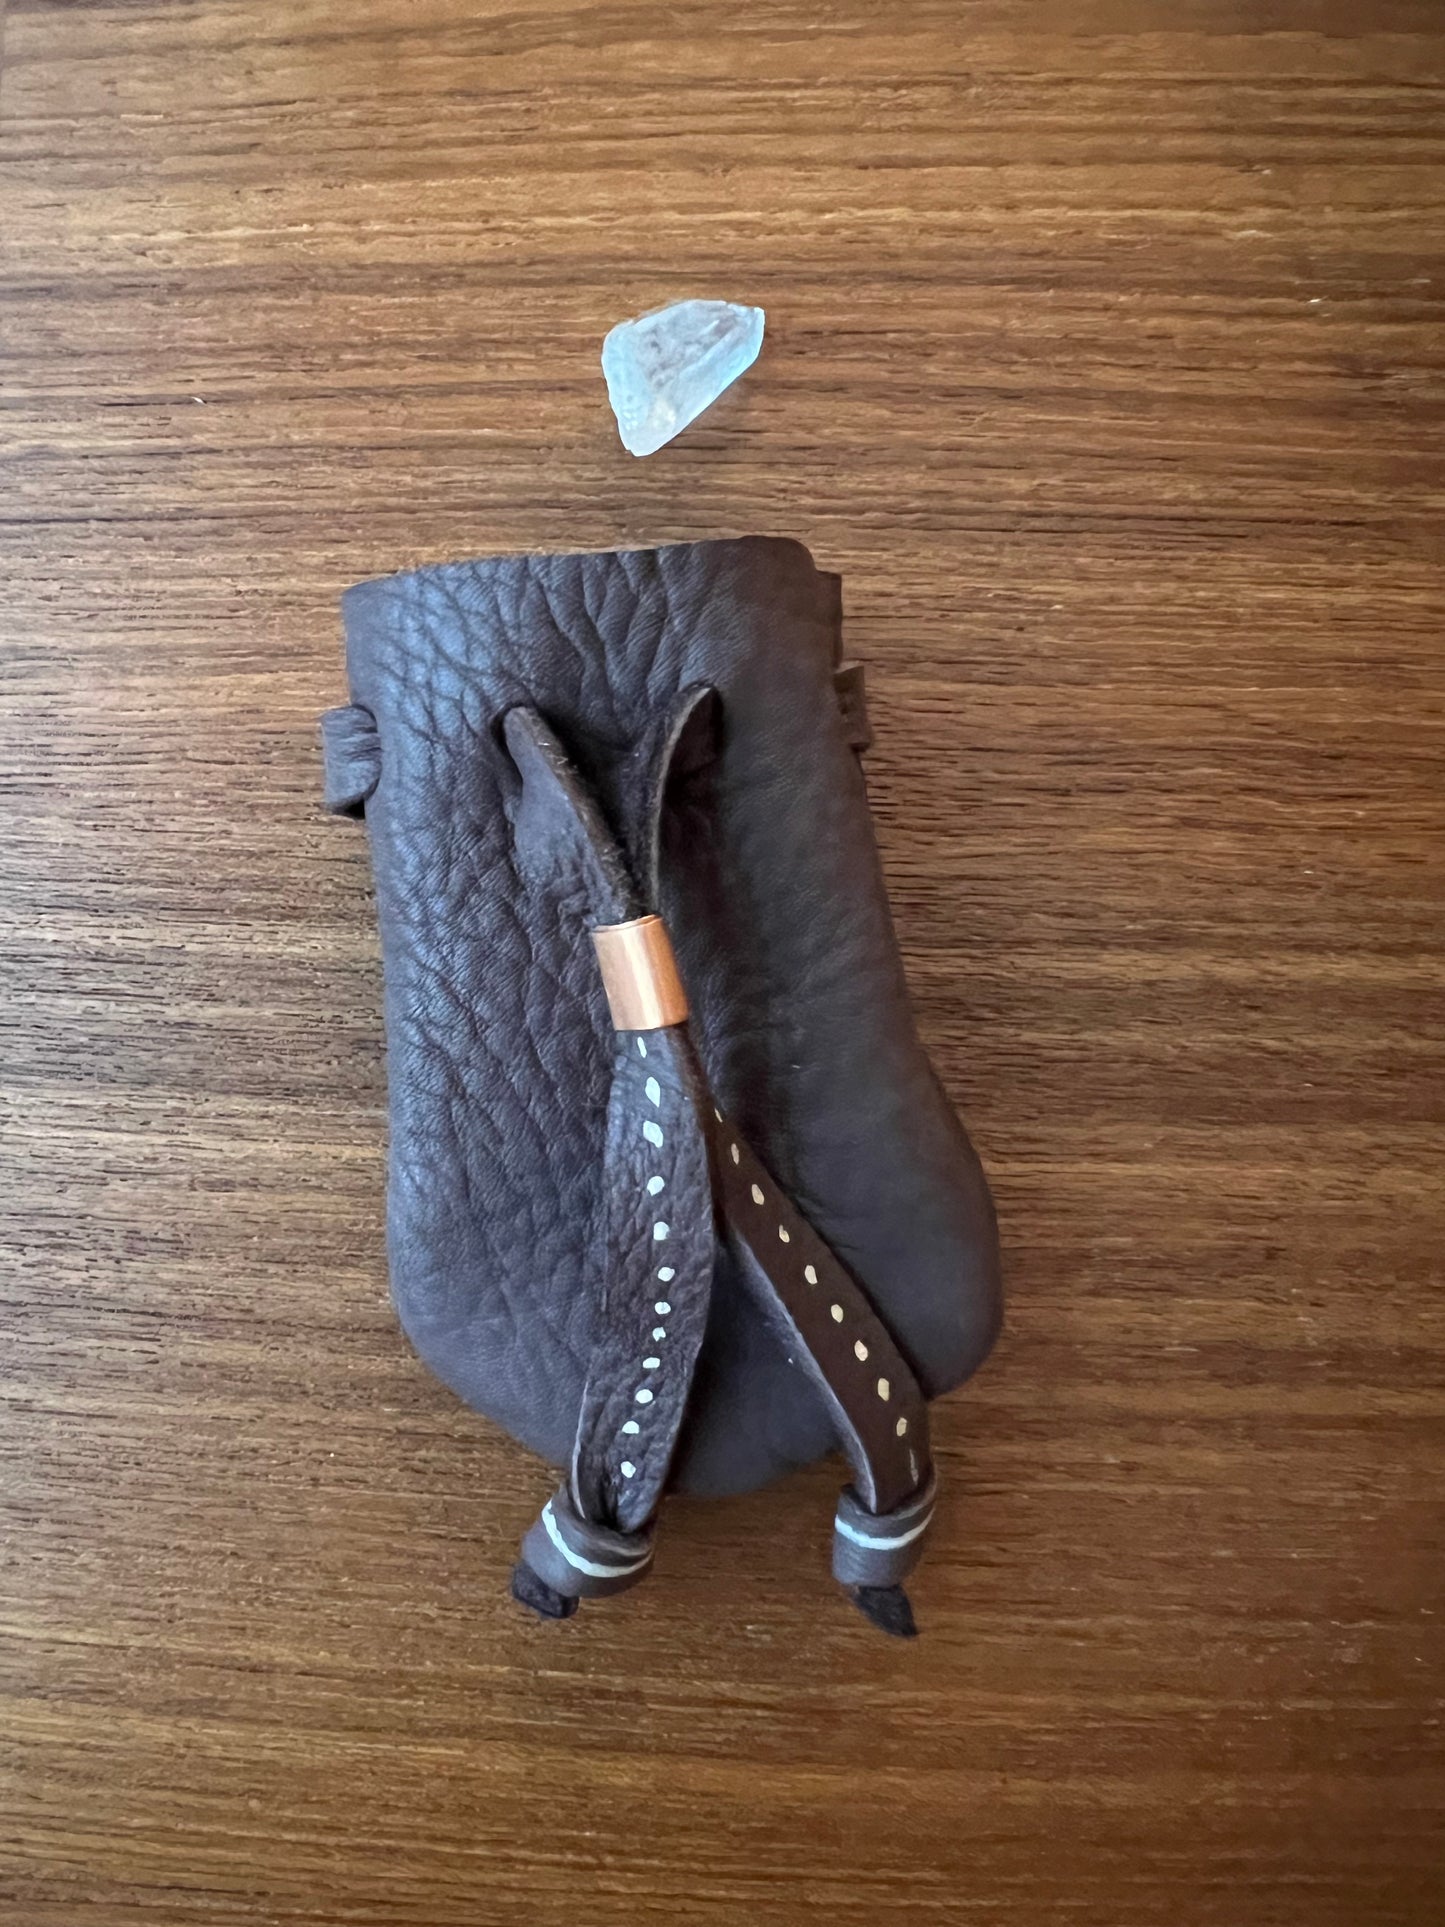 Leather Pouch | Leather Medicine Bag | Elkskin Pouch